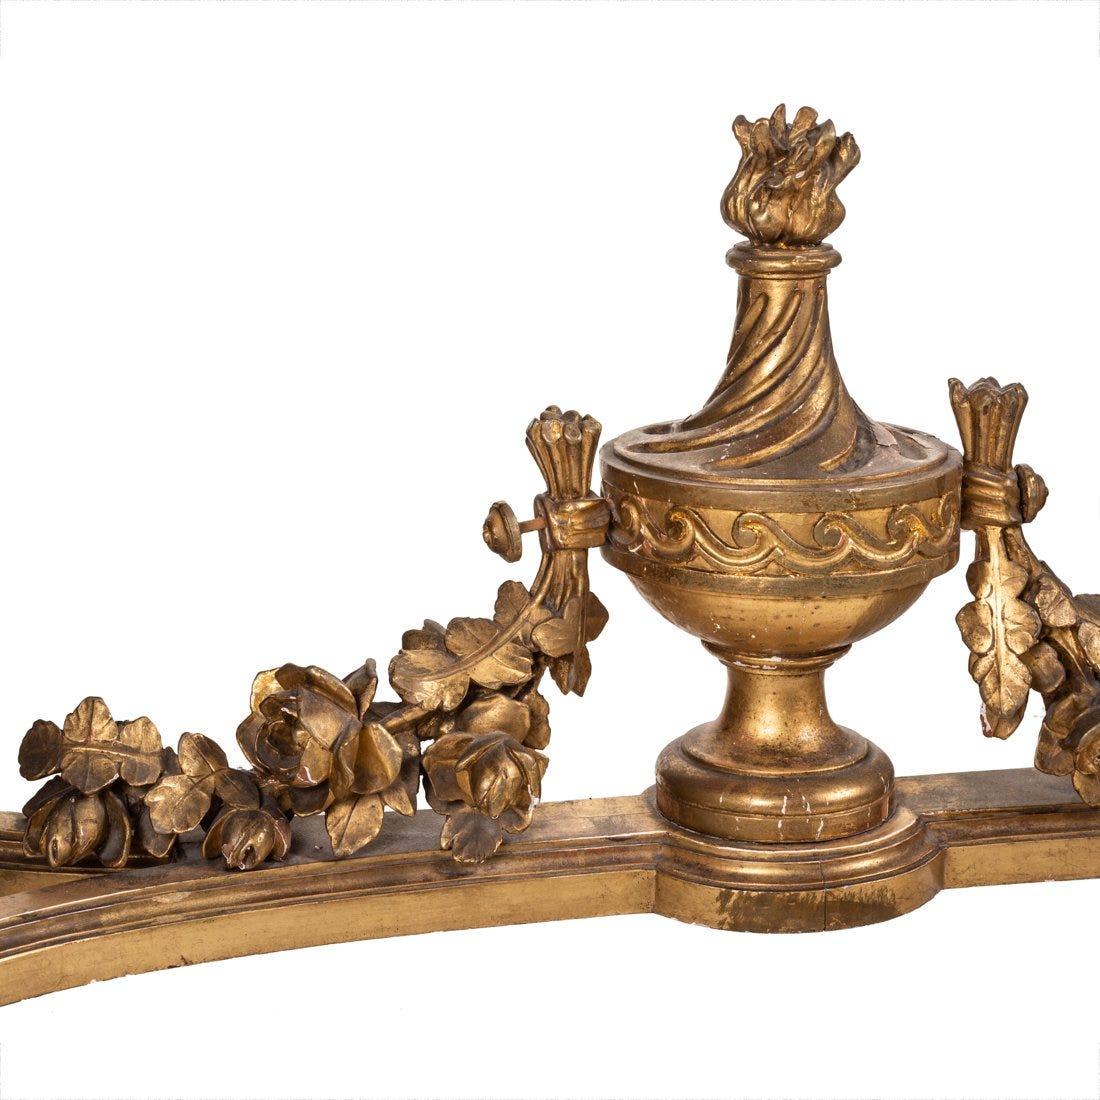 Hand-Carved Fine 19th Century French Louis XVI Gilt Carved Console with a Carrara Marble